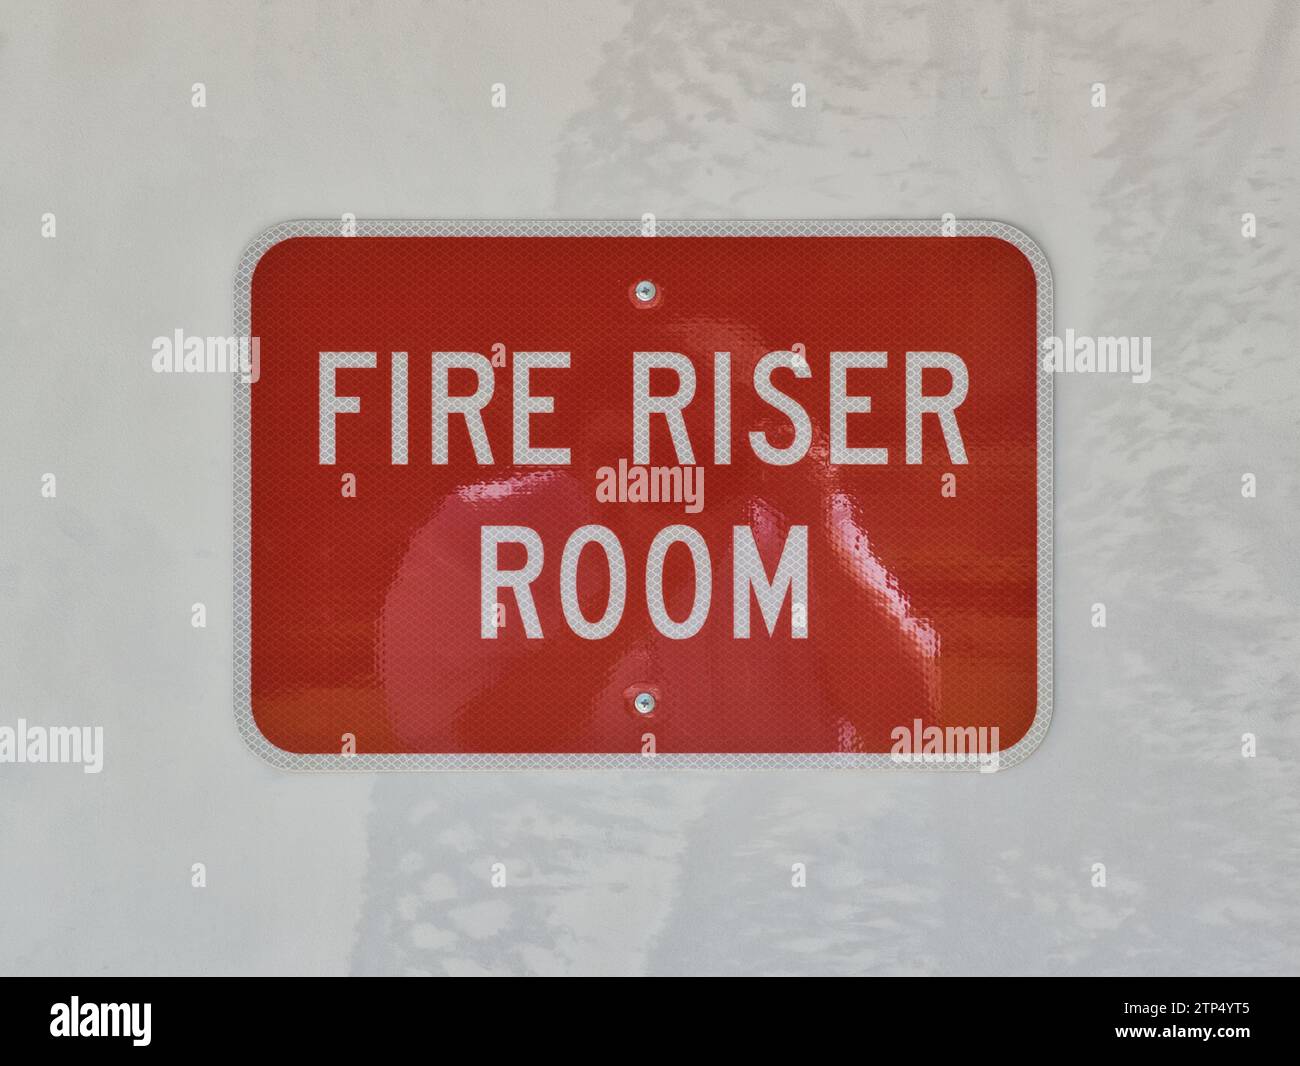 Fire Riser Room location sign isolated on an exterior door. Control center cabinet room for a commercial building's fire sprinkler system. Stock Photo